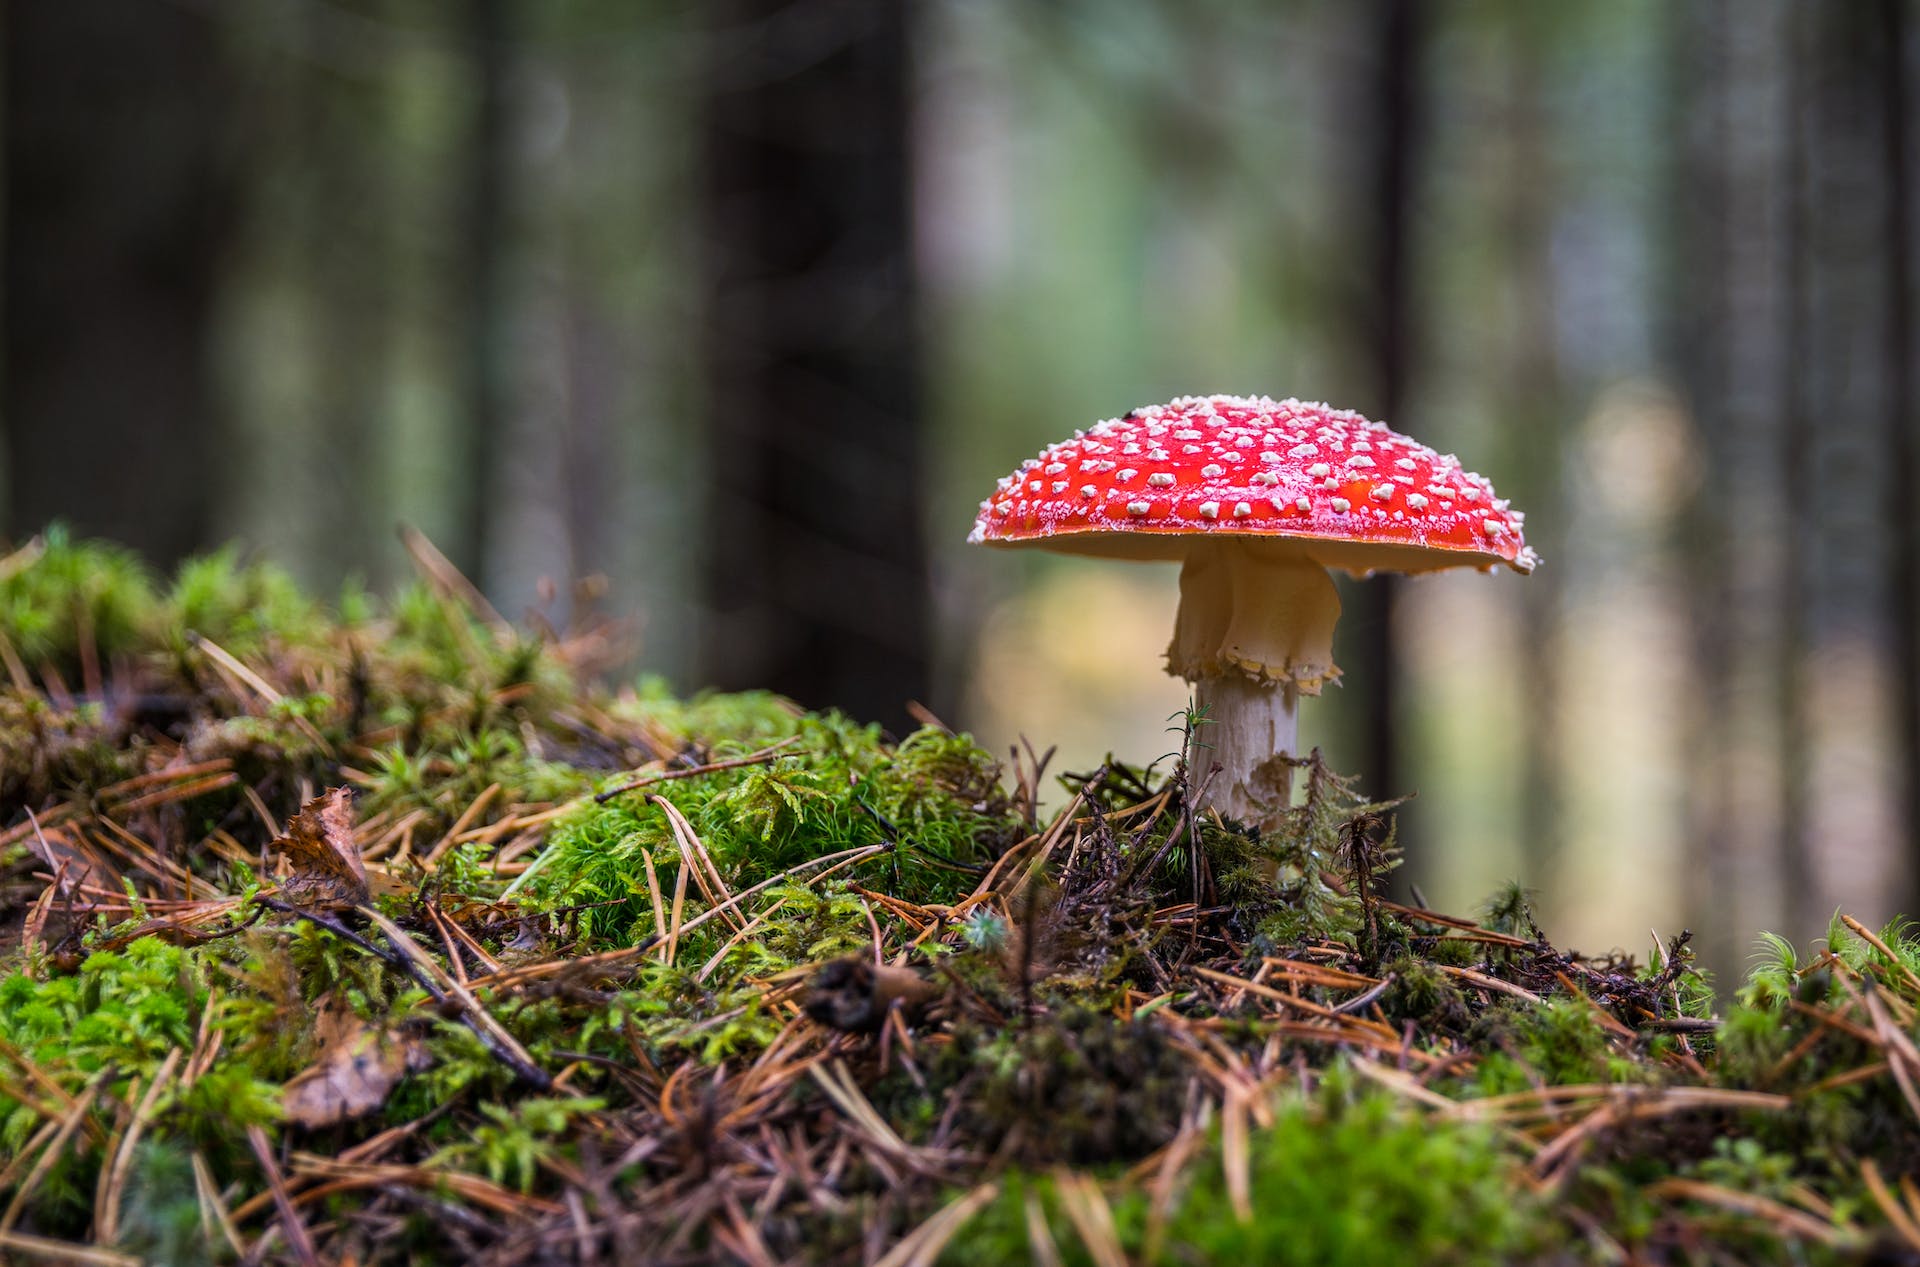 A bright red mushroom in a forest